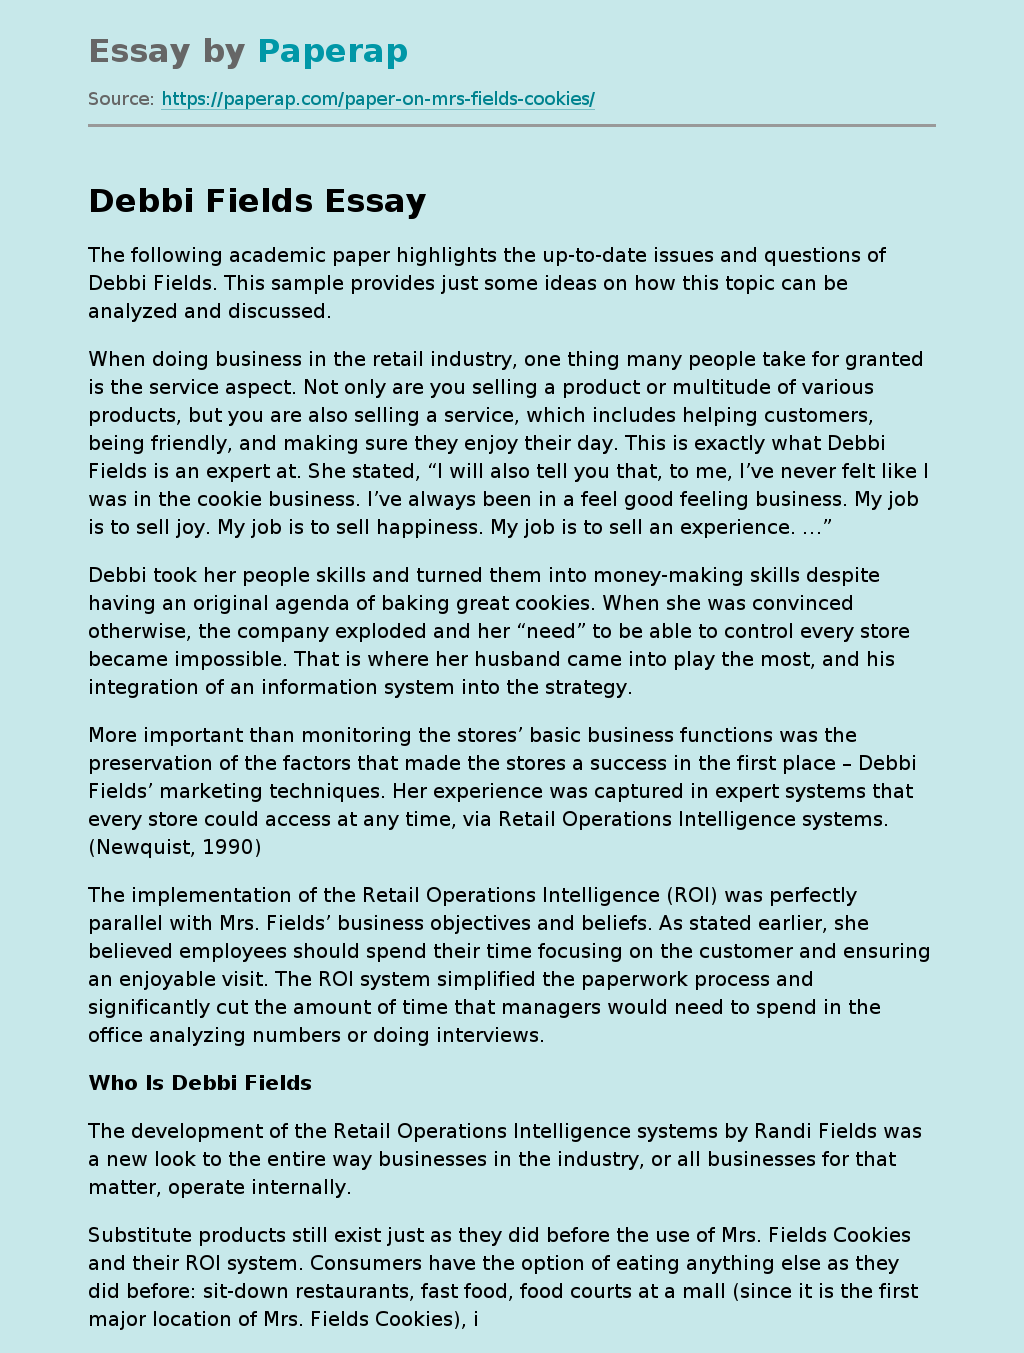 Exploring Debbi Fields' Contemporary Issues